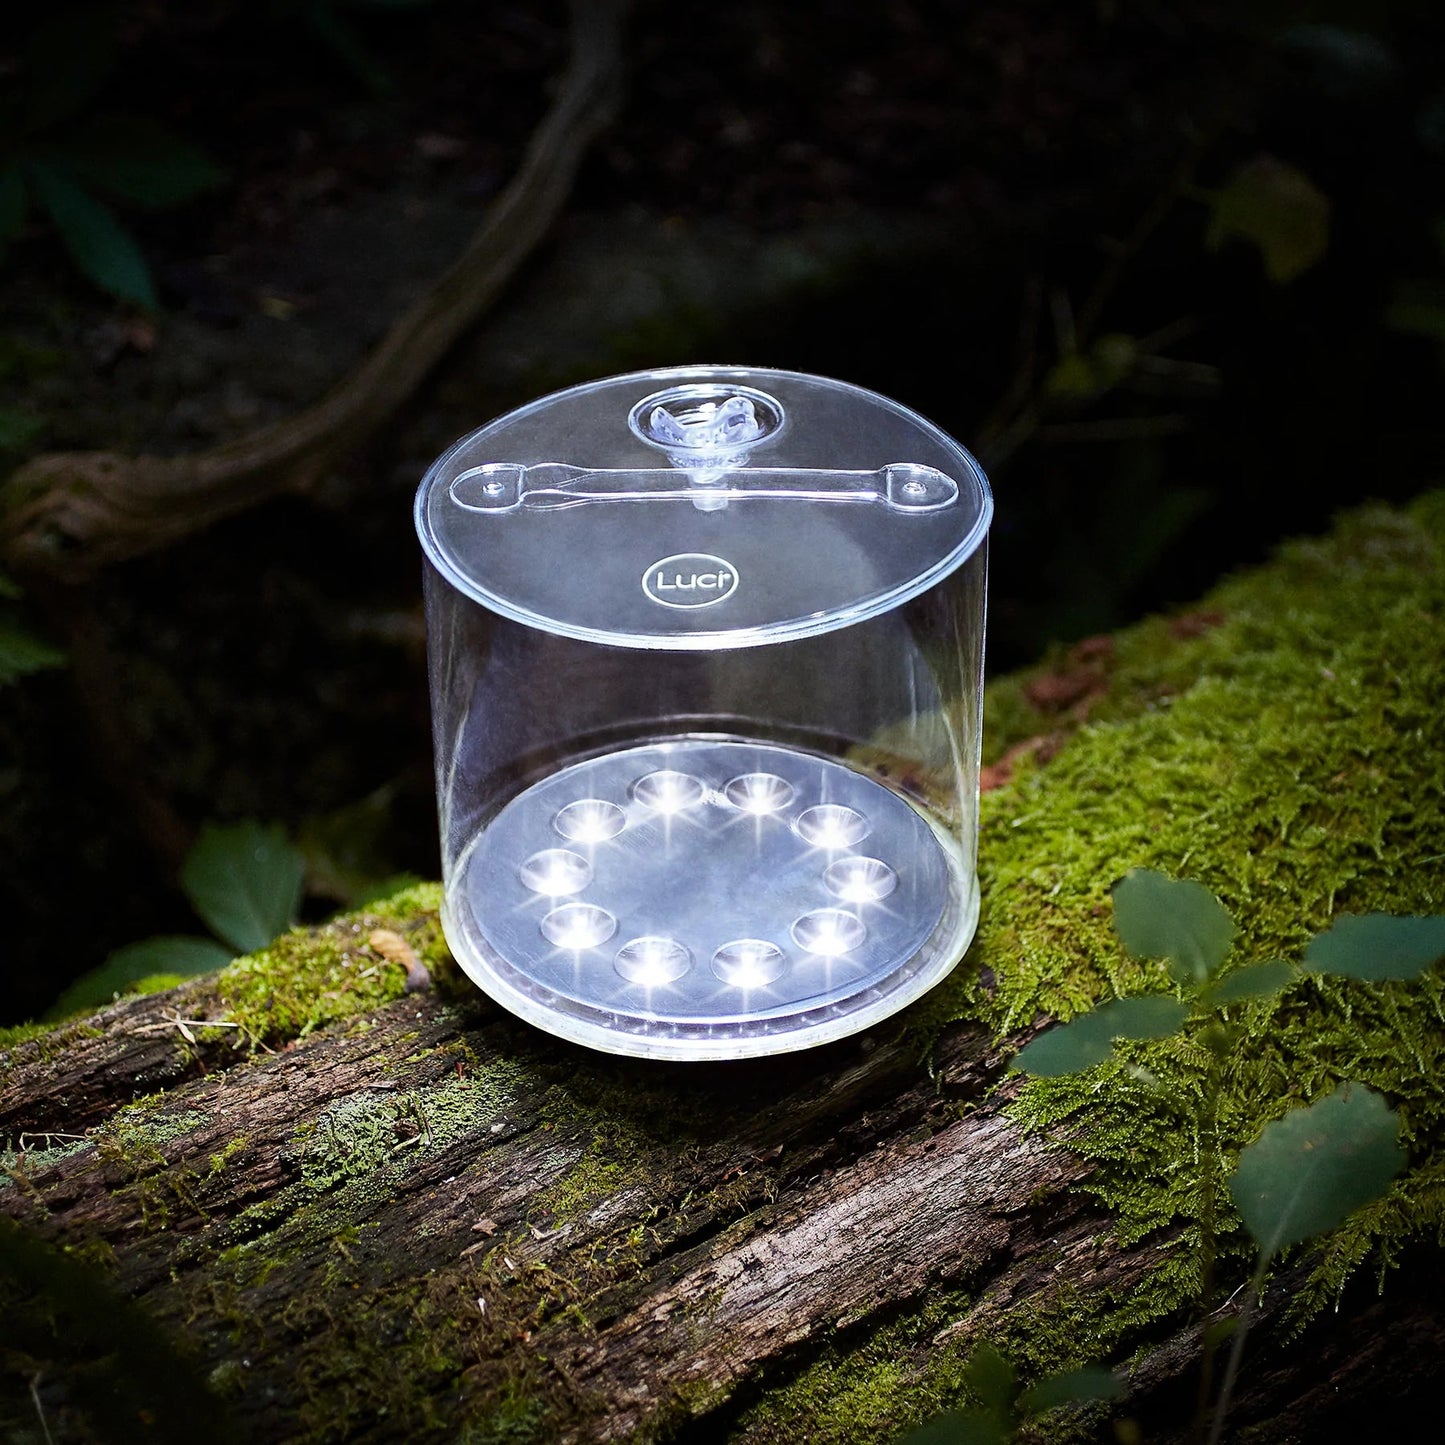 MPOWERED Luci® Outdoor 2.0 inflatable solar light